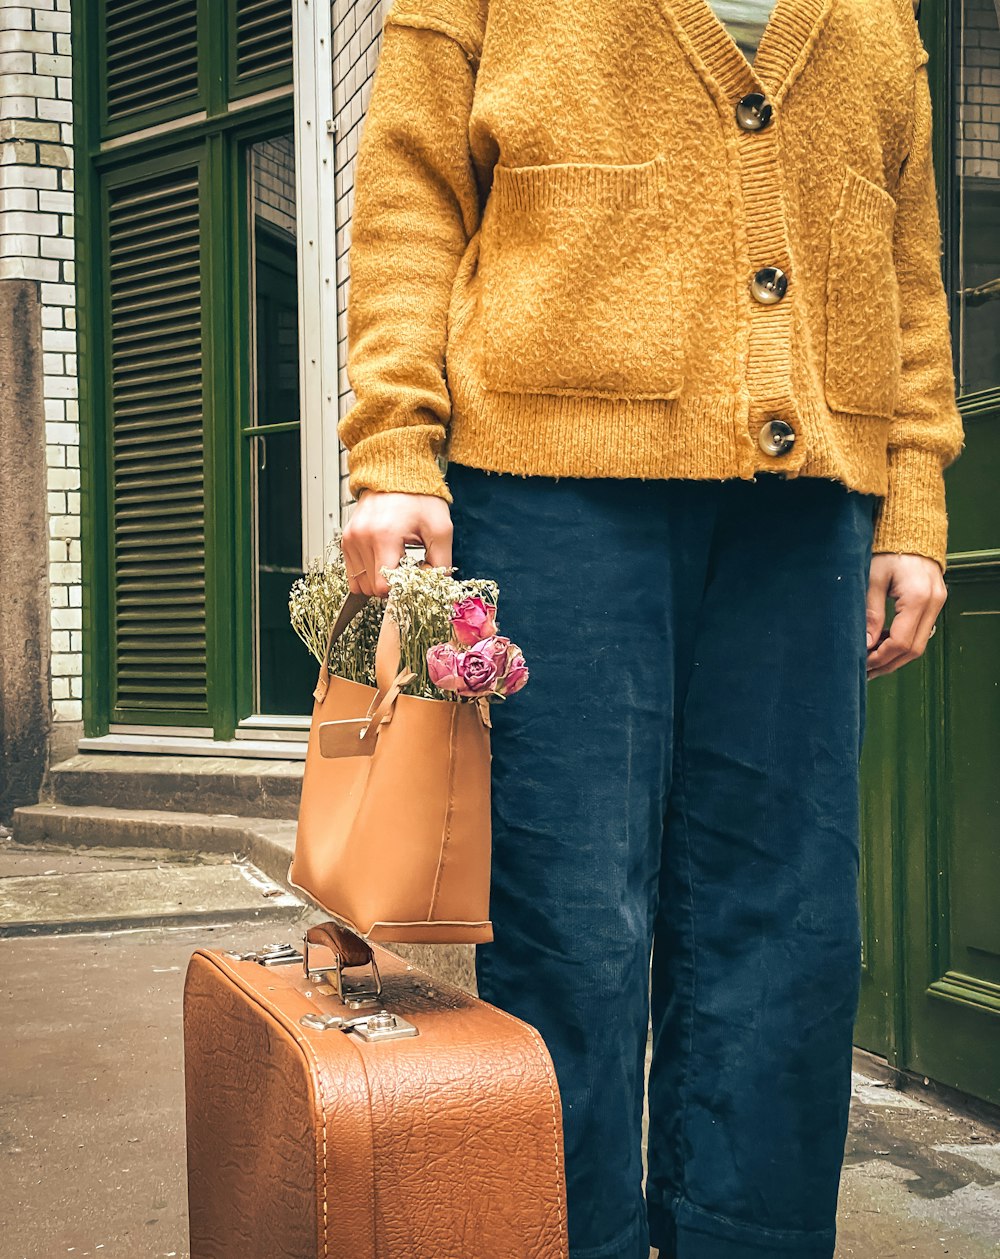 a woman standing next to a brown suitcase